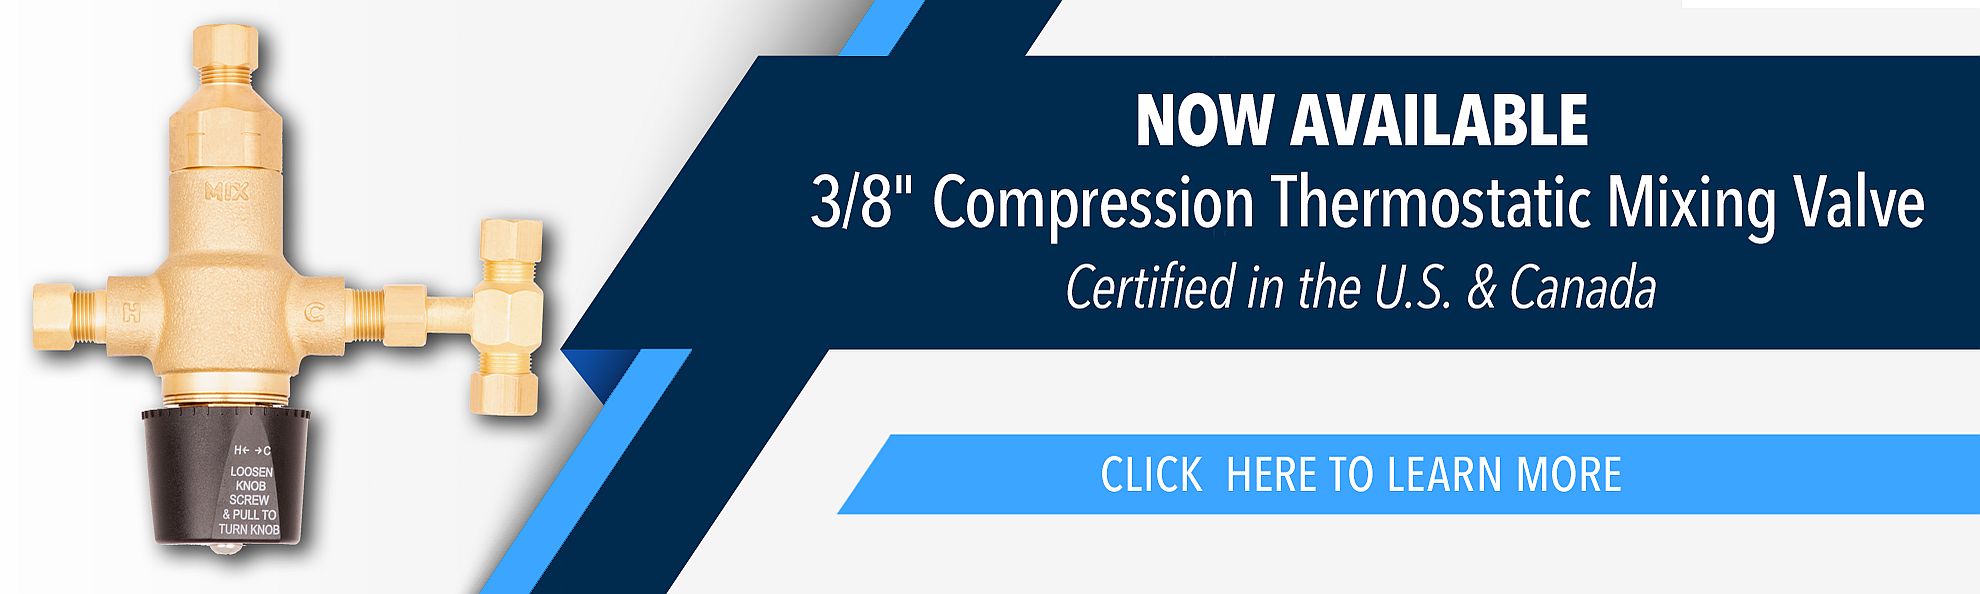 Now Available - 3/8" Compression Thermostatic Mixing Valve